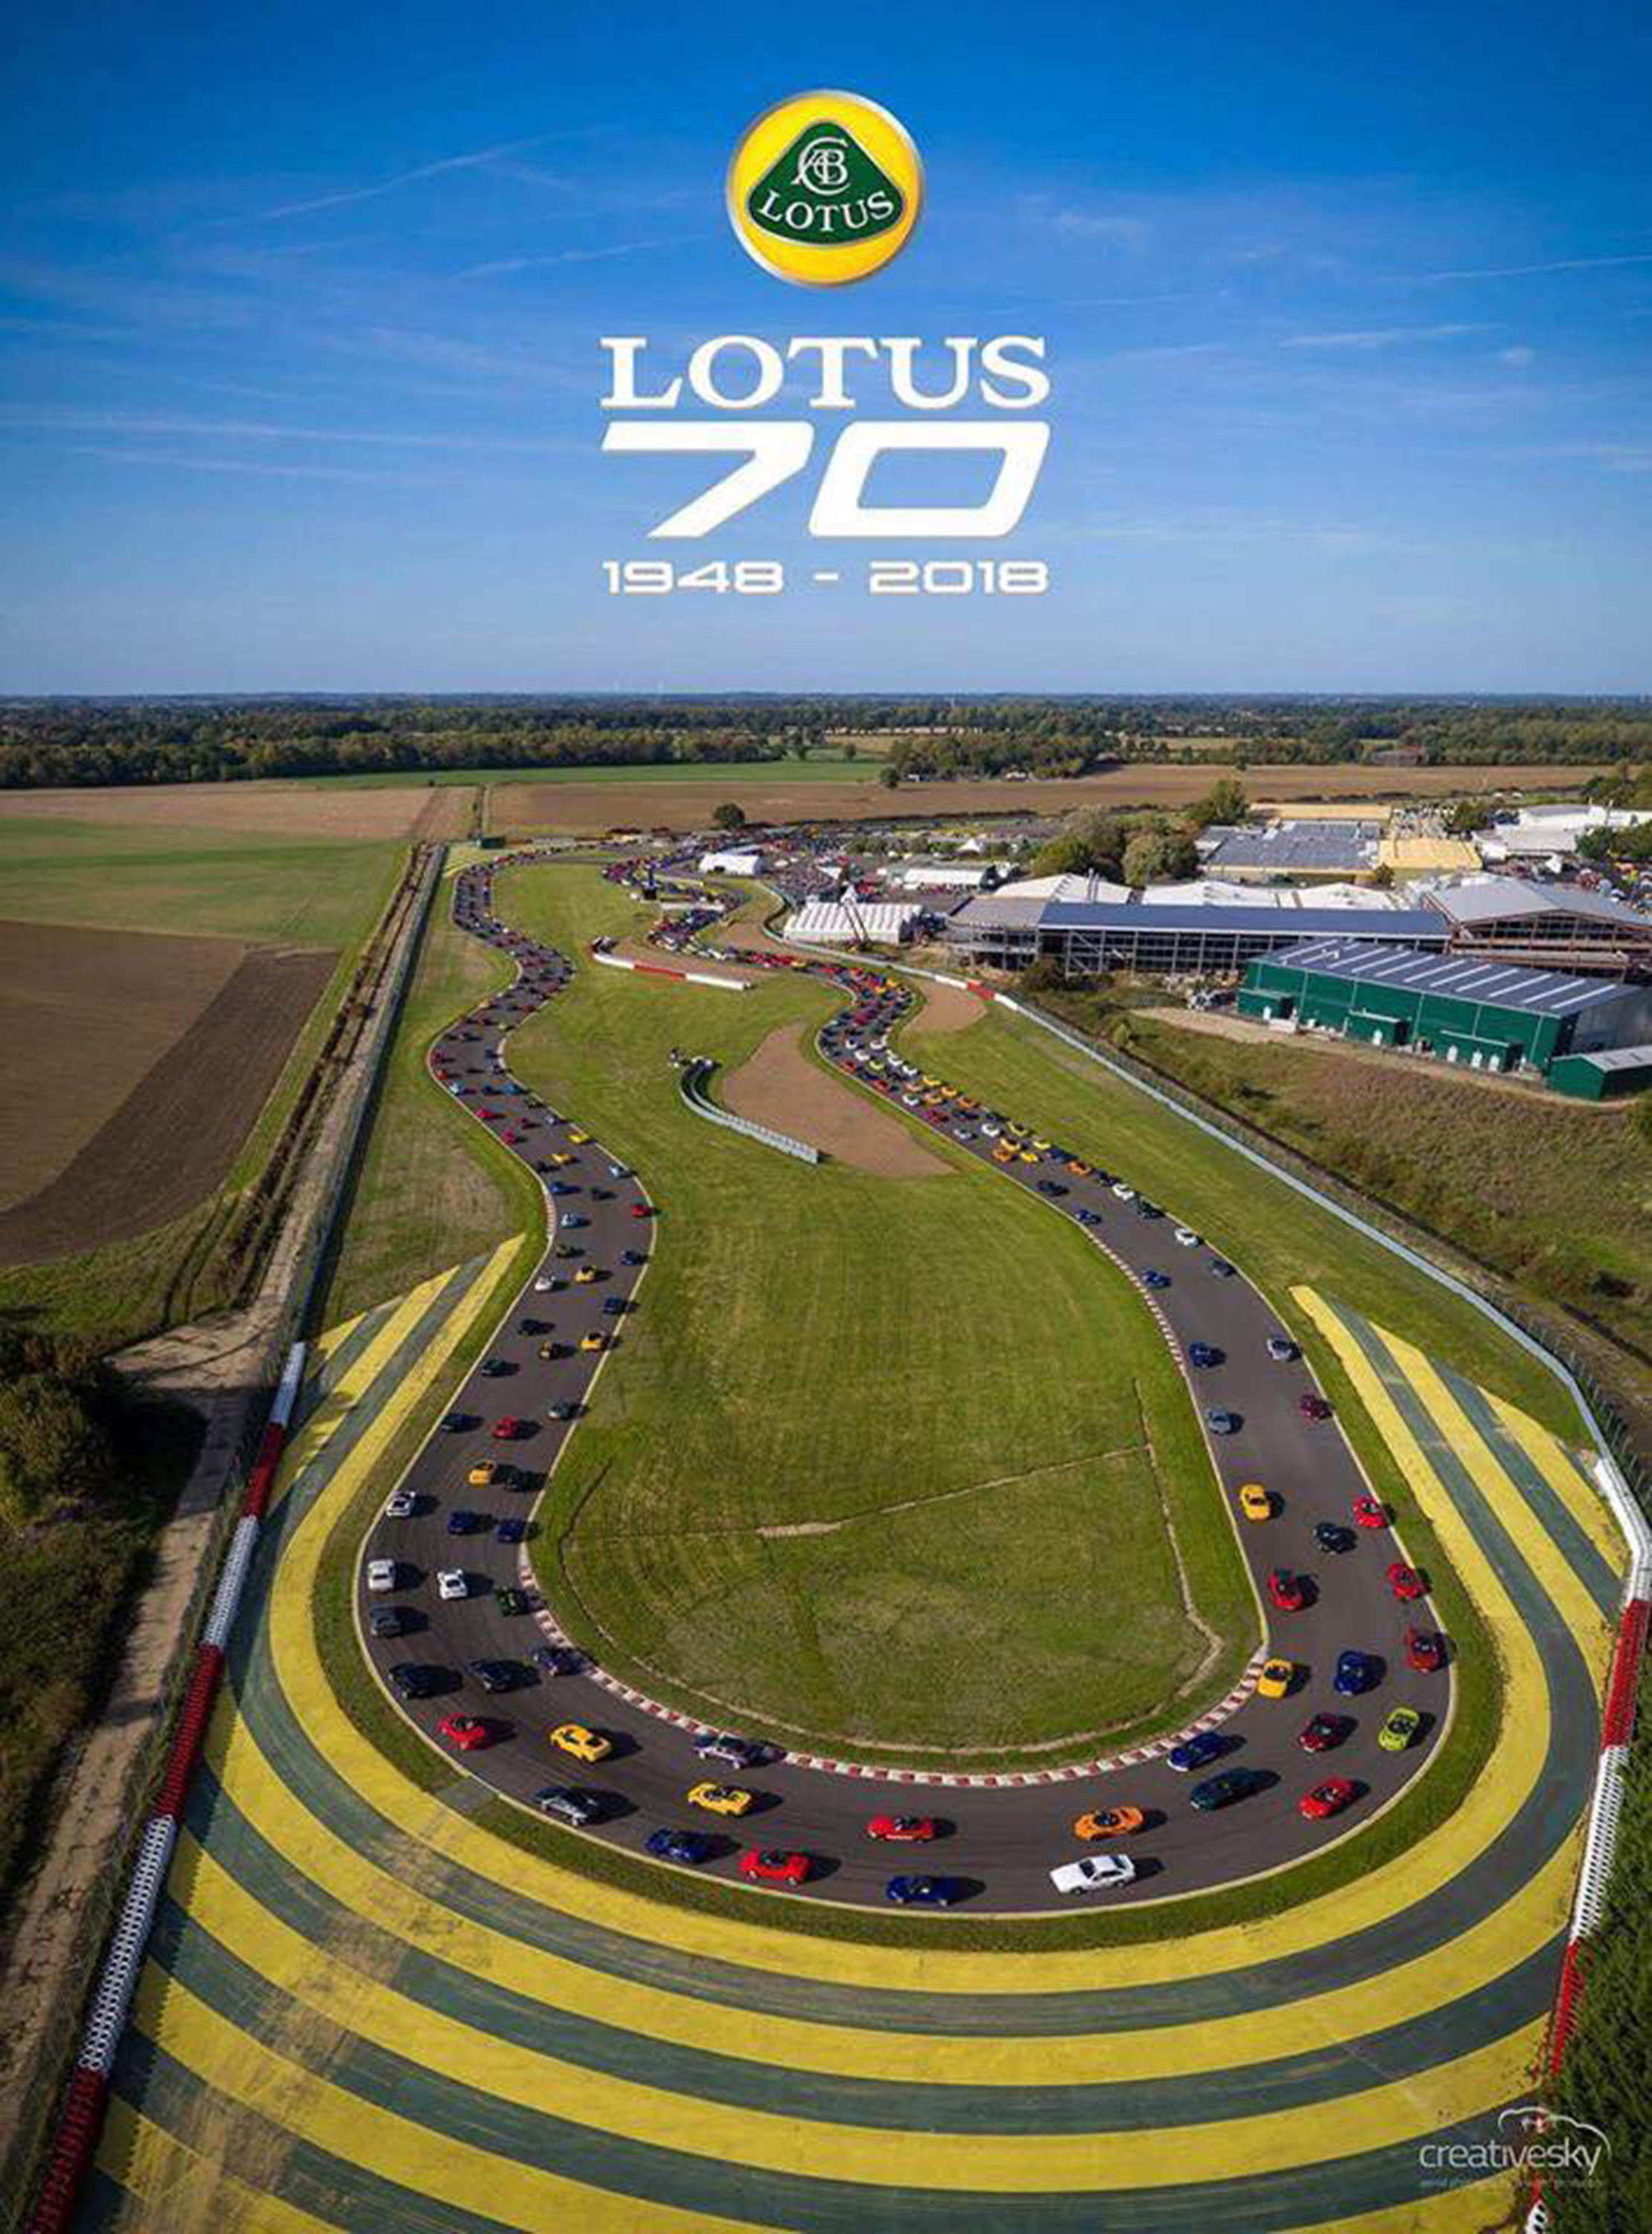 parading on our hethel circuit to celebrate lotus70.